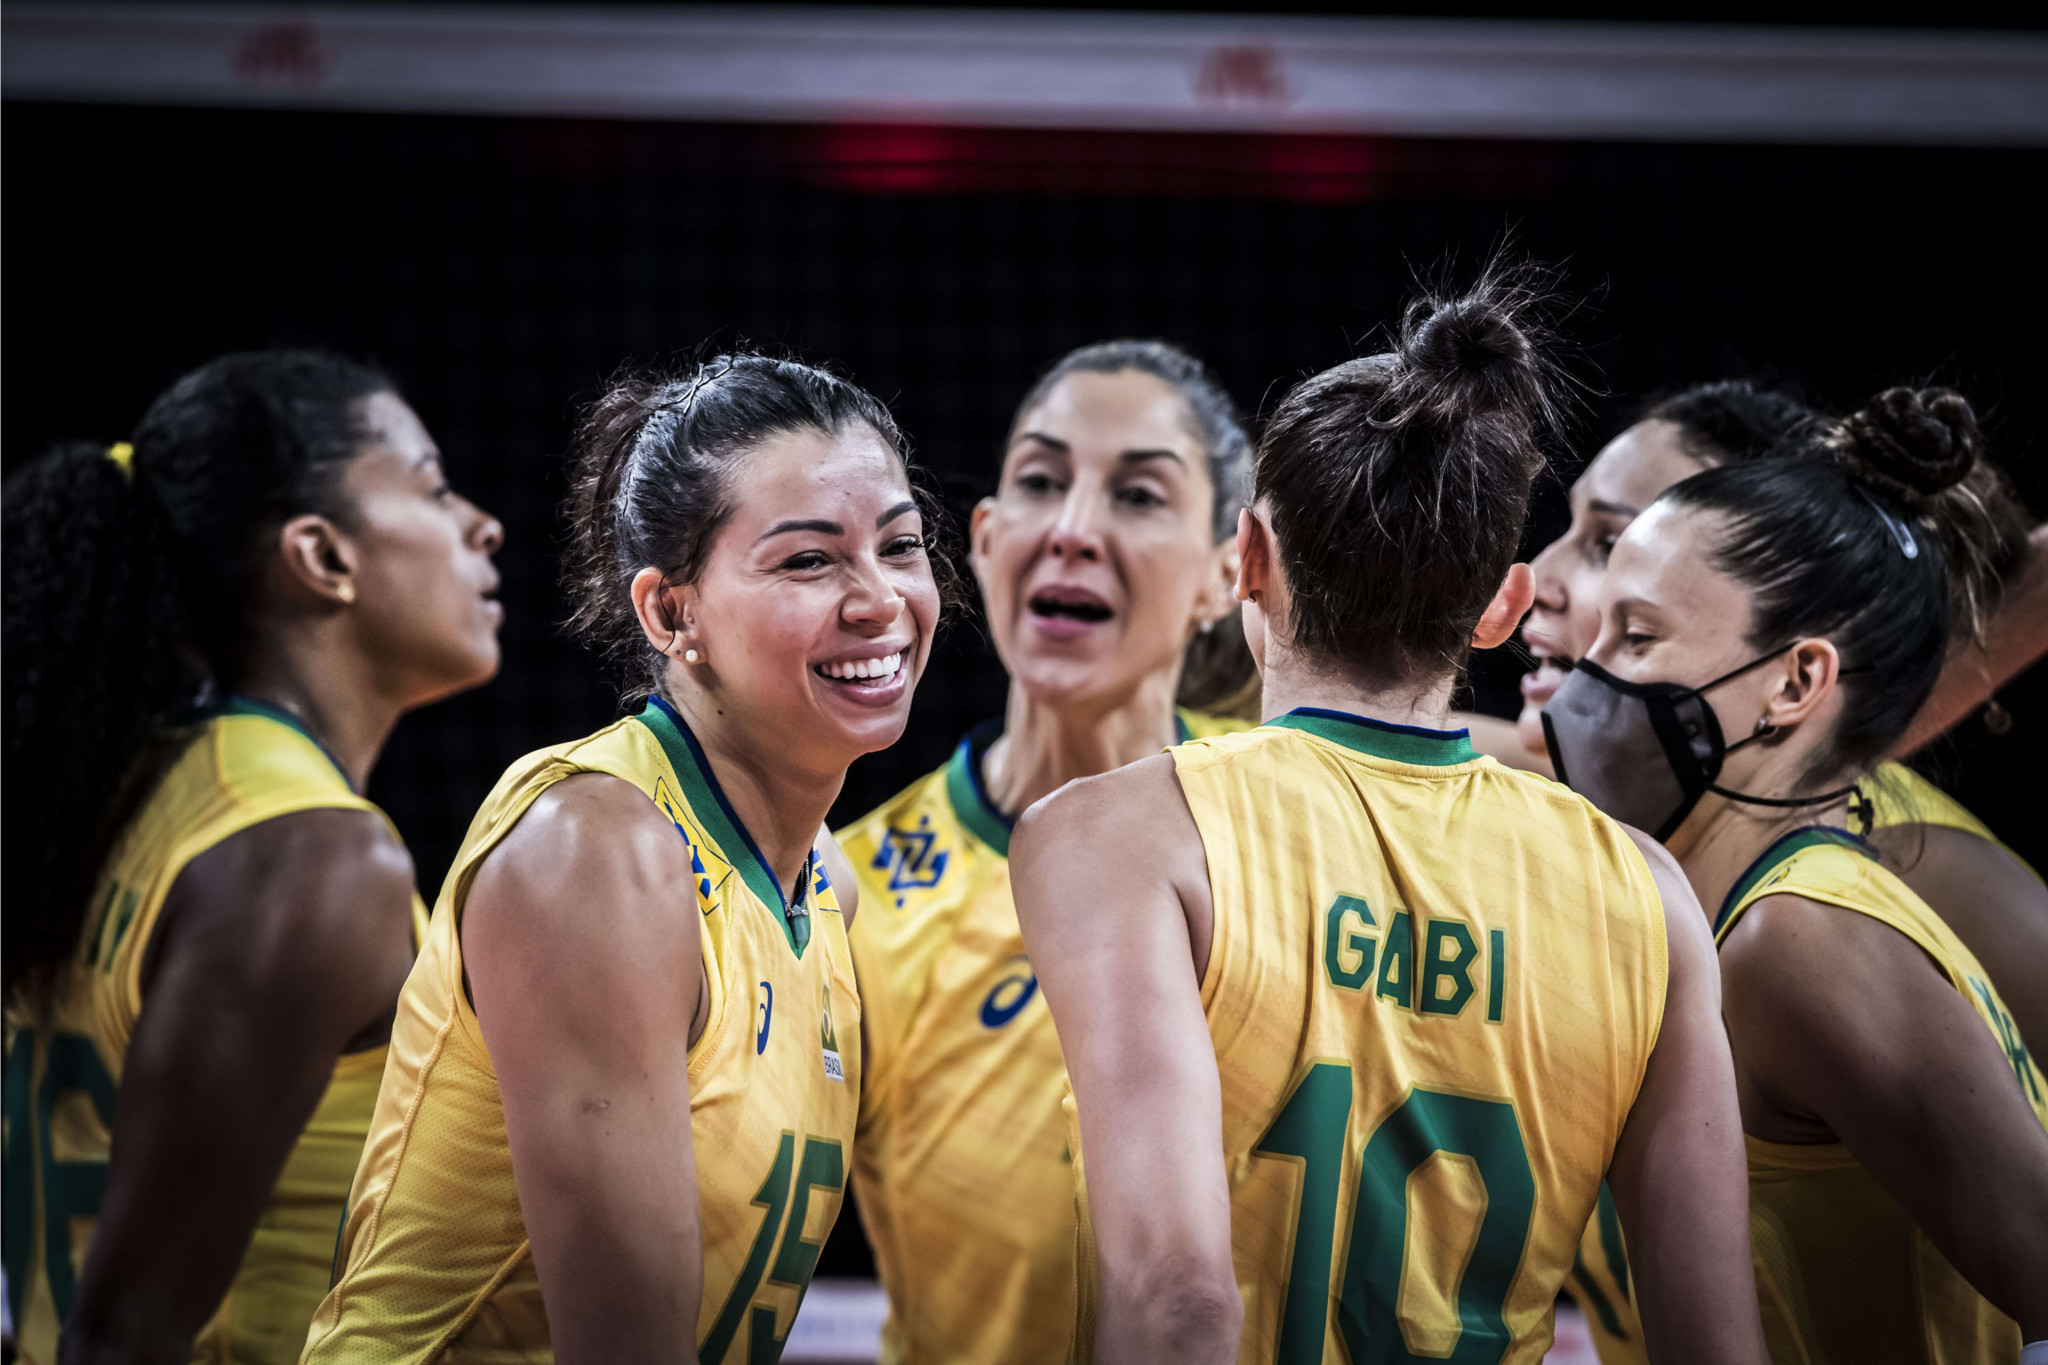 Brazil's women defeated Turkey on the final day of round-robin play at the Volleyball Nations League, a result that meant their opponents finished in fourth place 